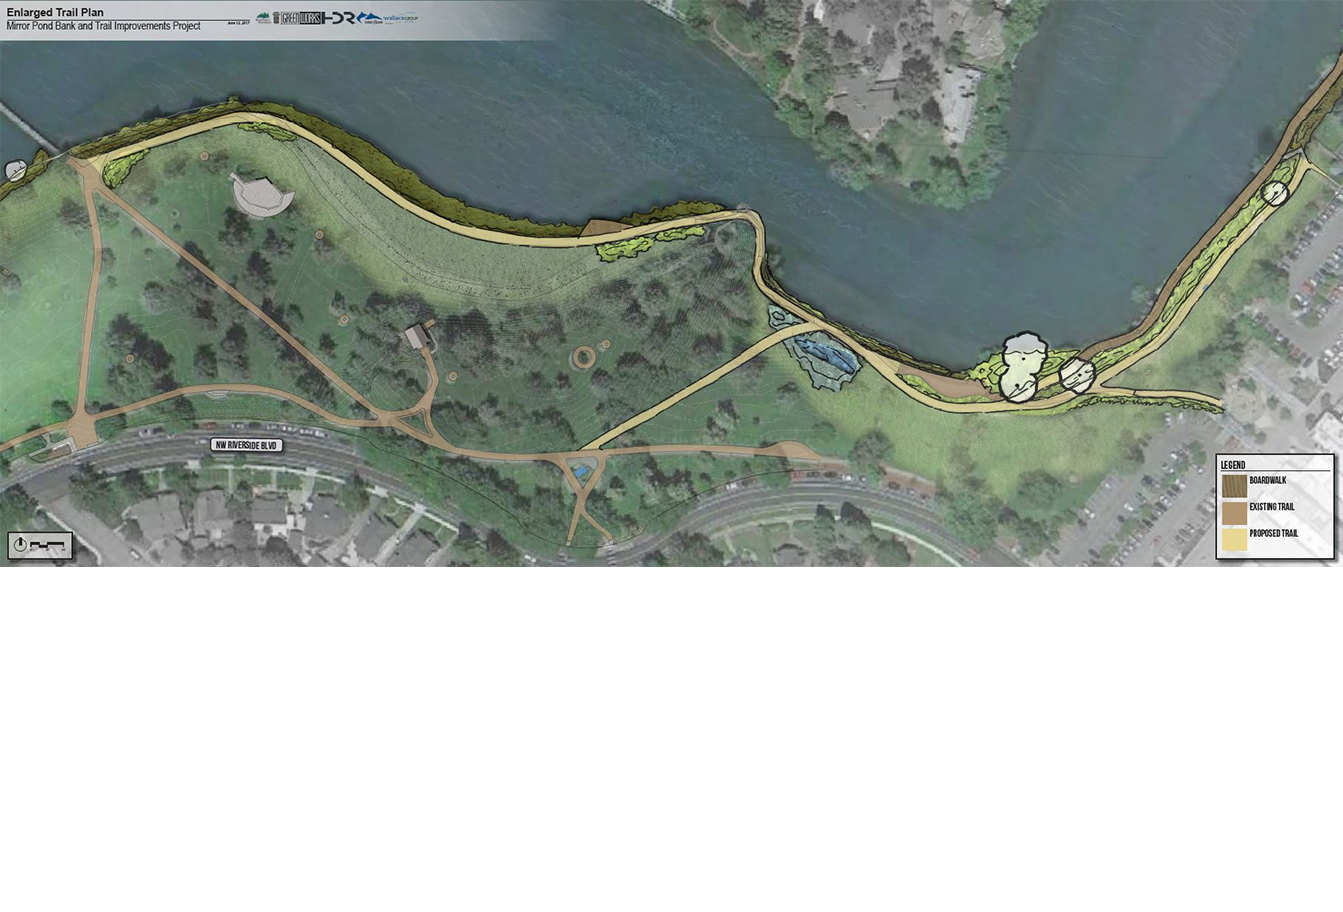 renderings of a new Mirror Pond trail